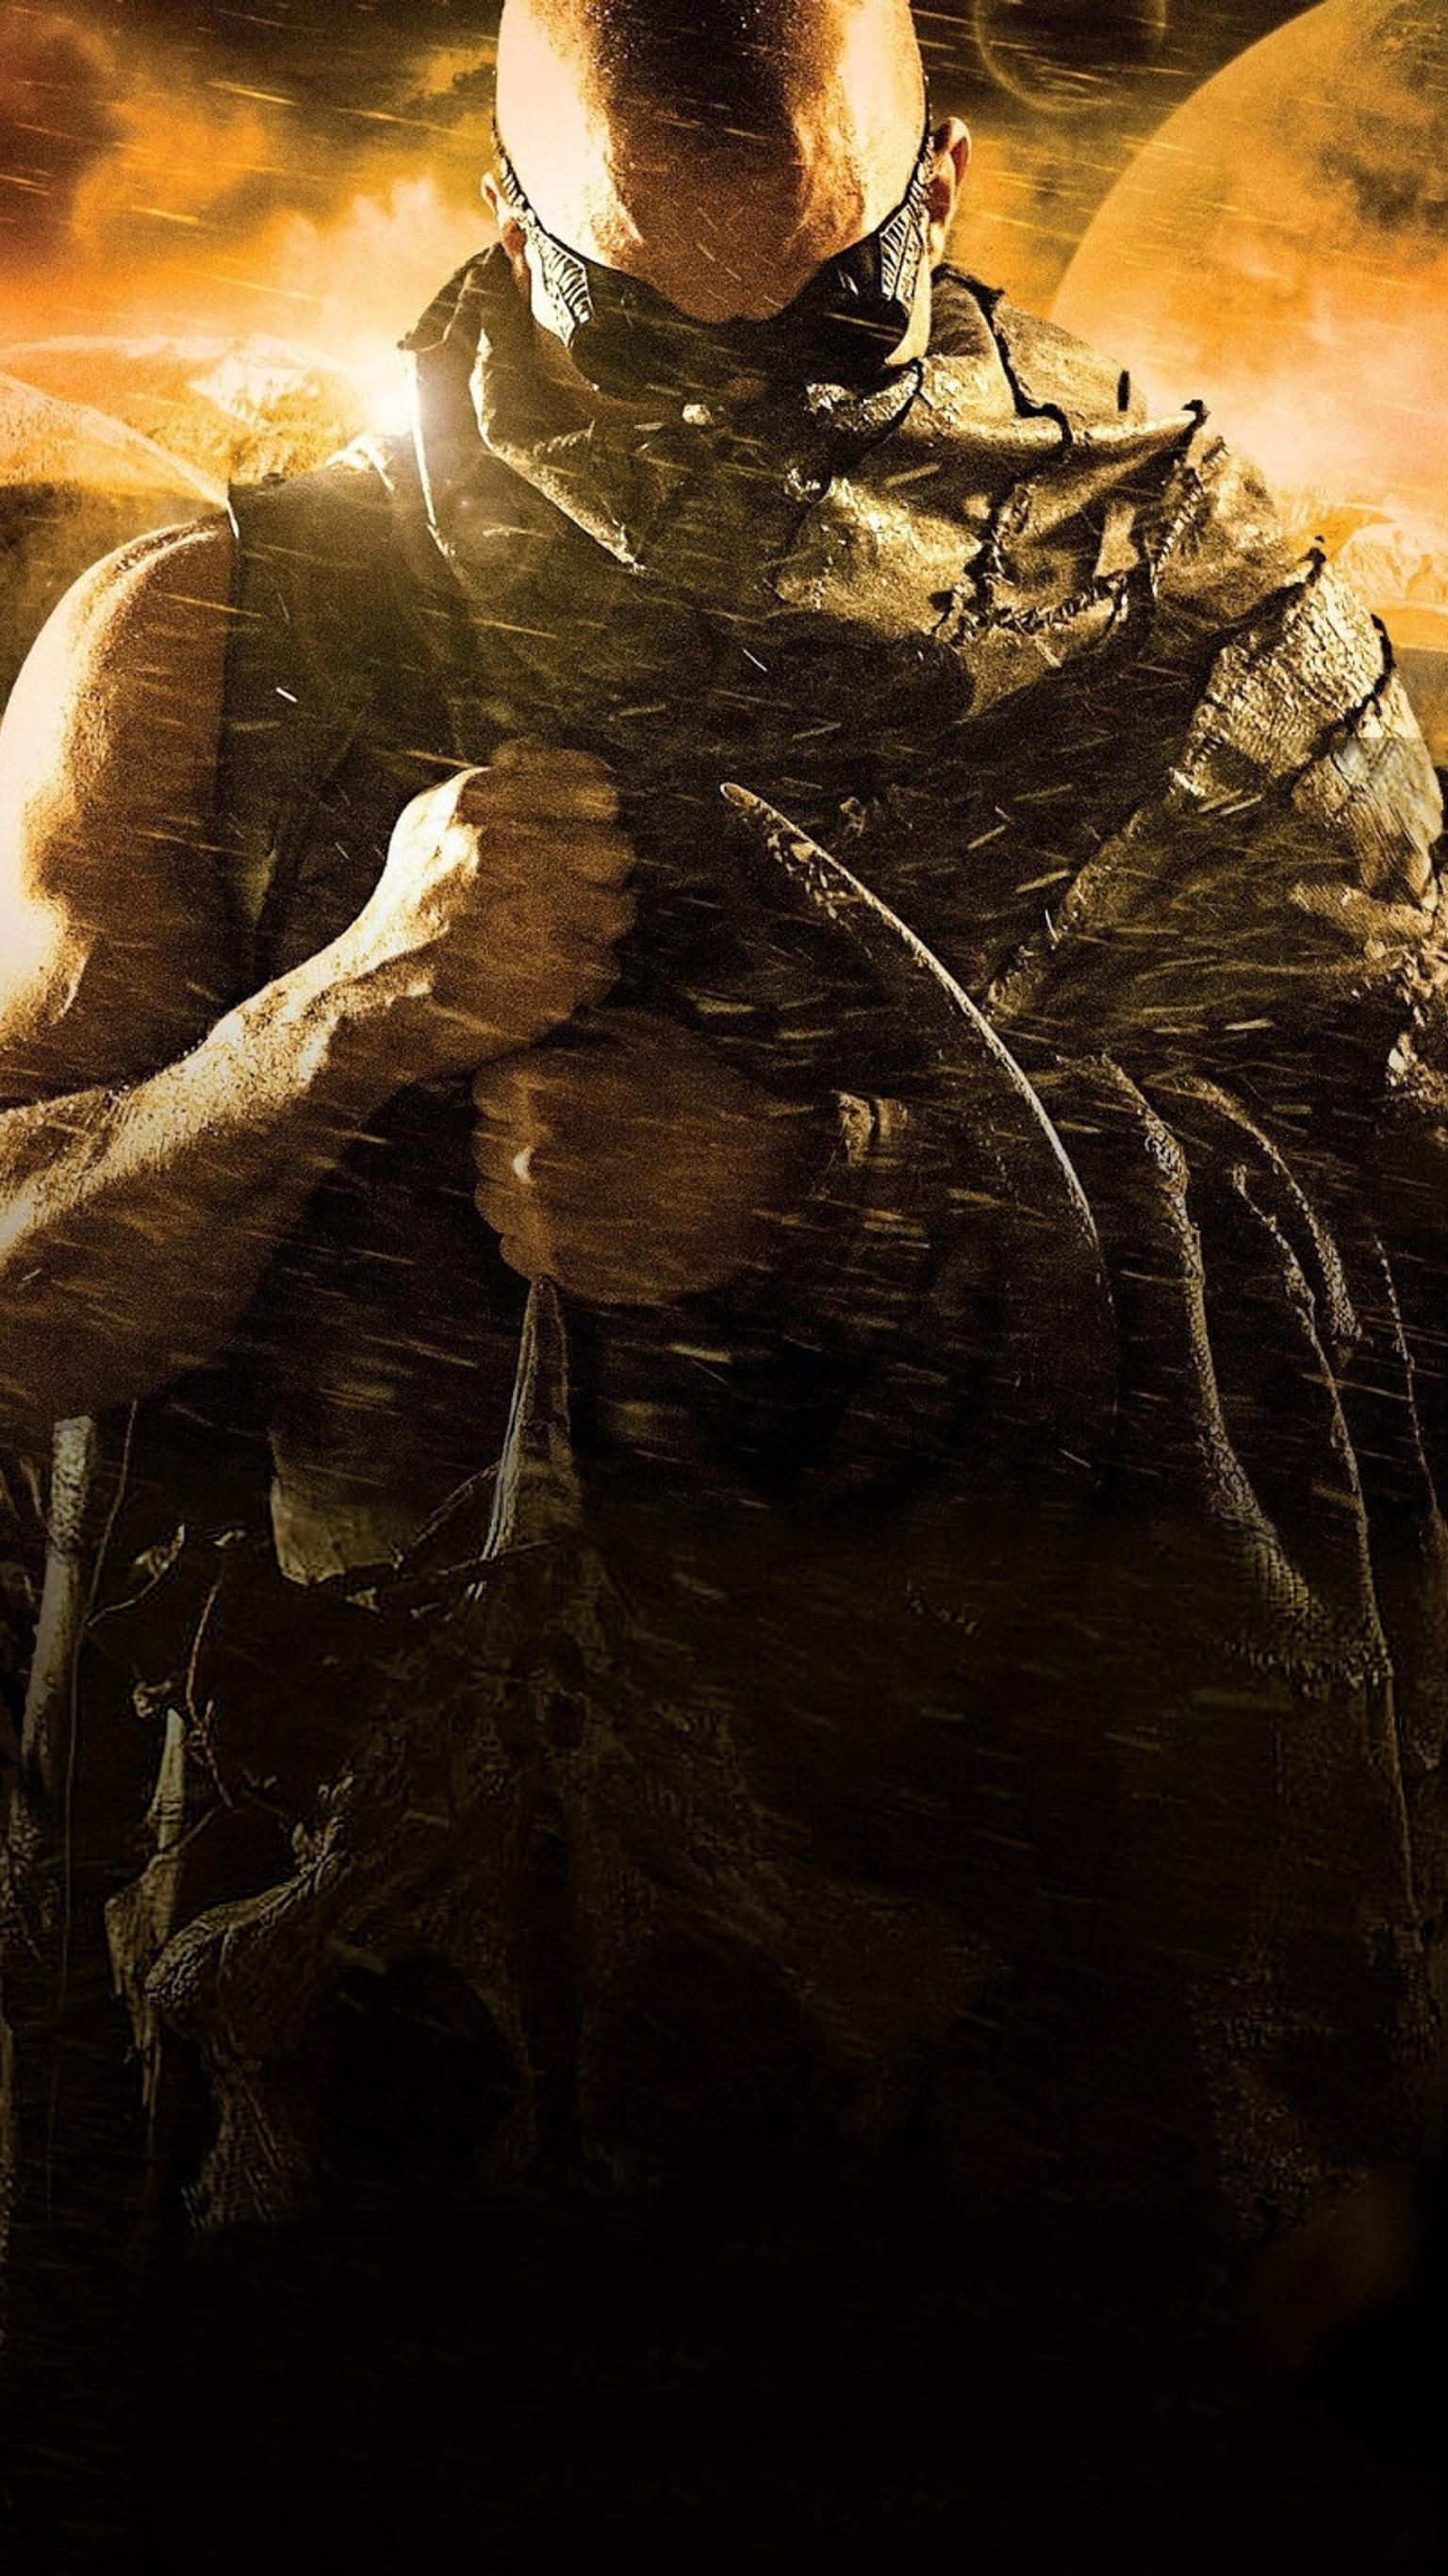 Riddick (2013) Phone Wallpaper. Moviemania. Movie posters, Action movie poster, Cute girl wallpaper